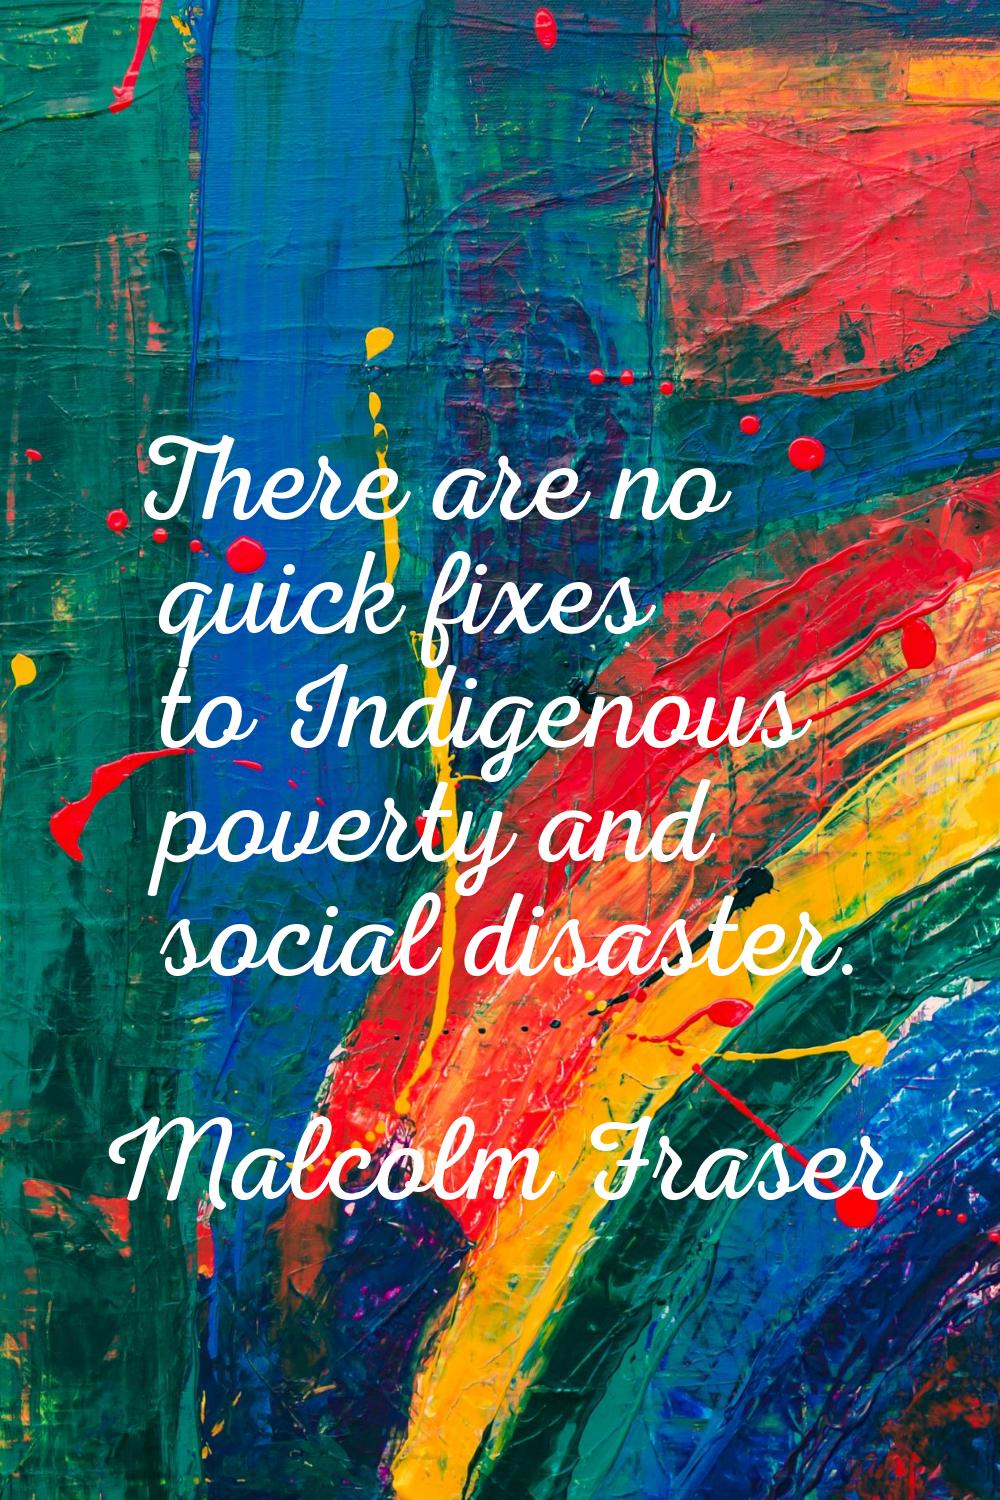 There are no quick fixes to Indigenous poverty and social disaster.